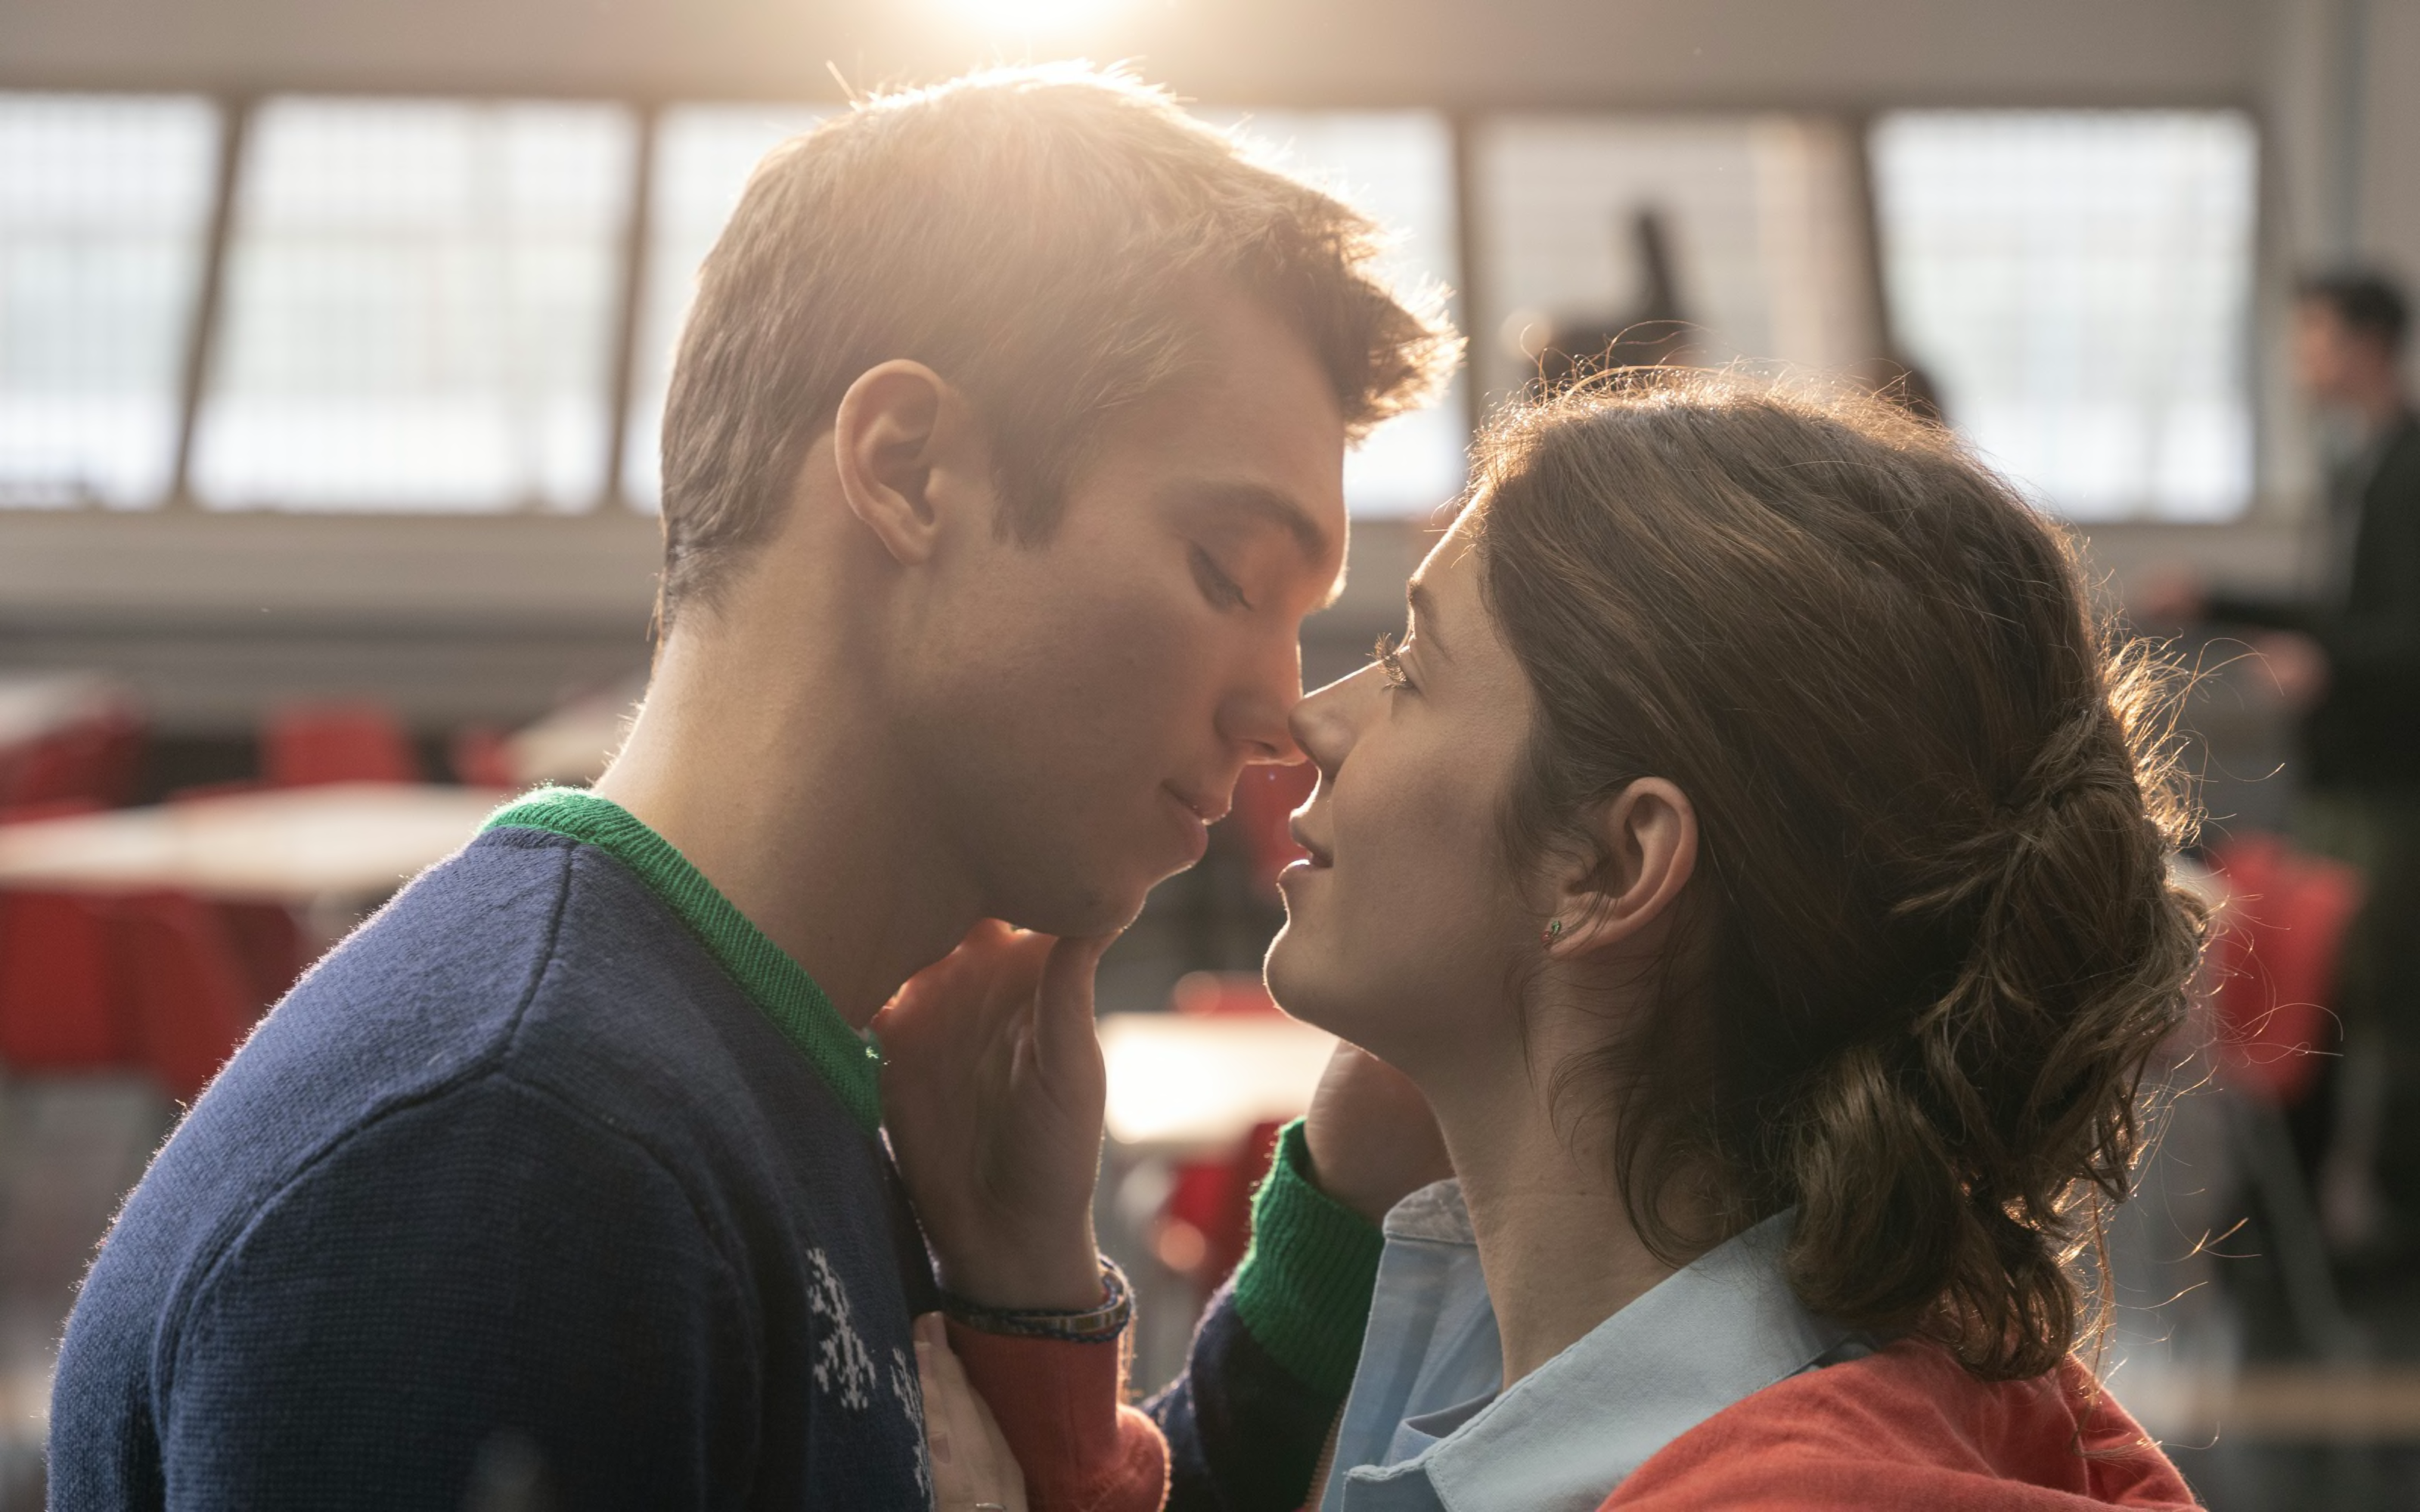 FlickMatic on X: Good News ' Love At First Kiss ' [2023] Netflix  Original Spanish Romantic Comedy Drama Film Will be Streaming in #Hindi,  #English & #Spanish Languages From 3rd March 2023